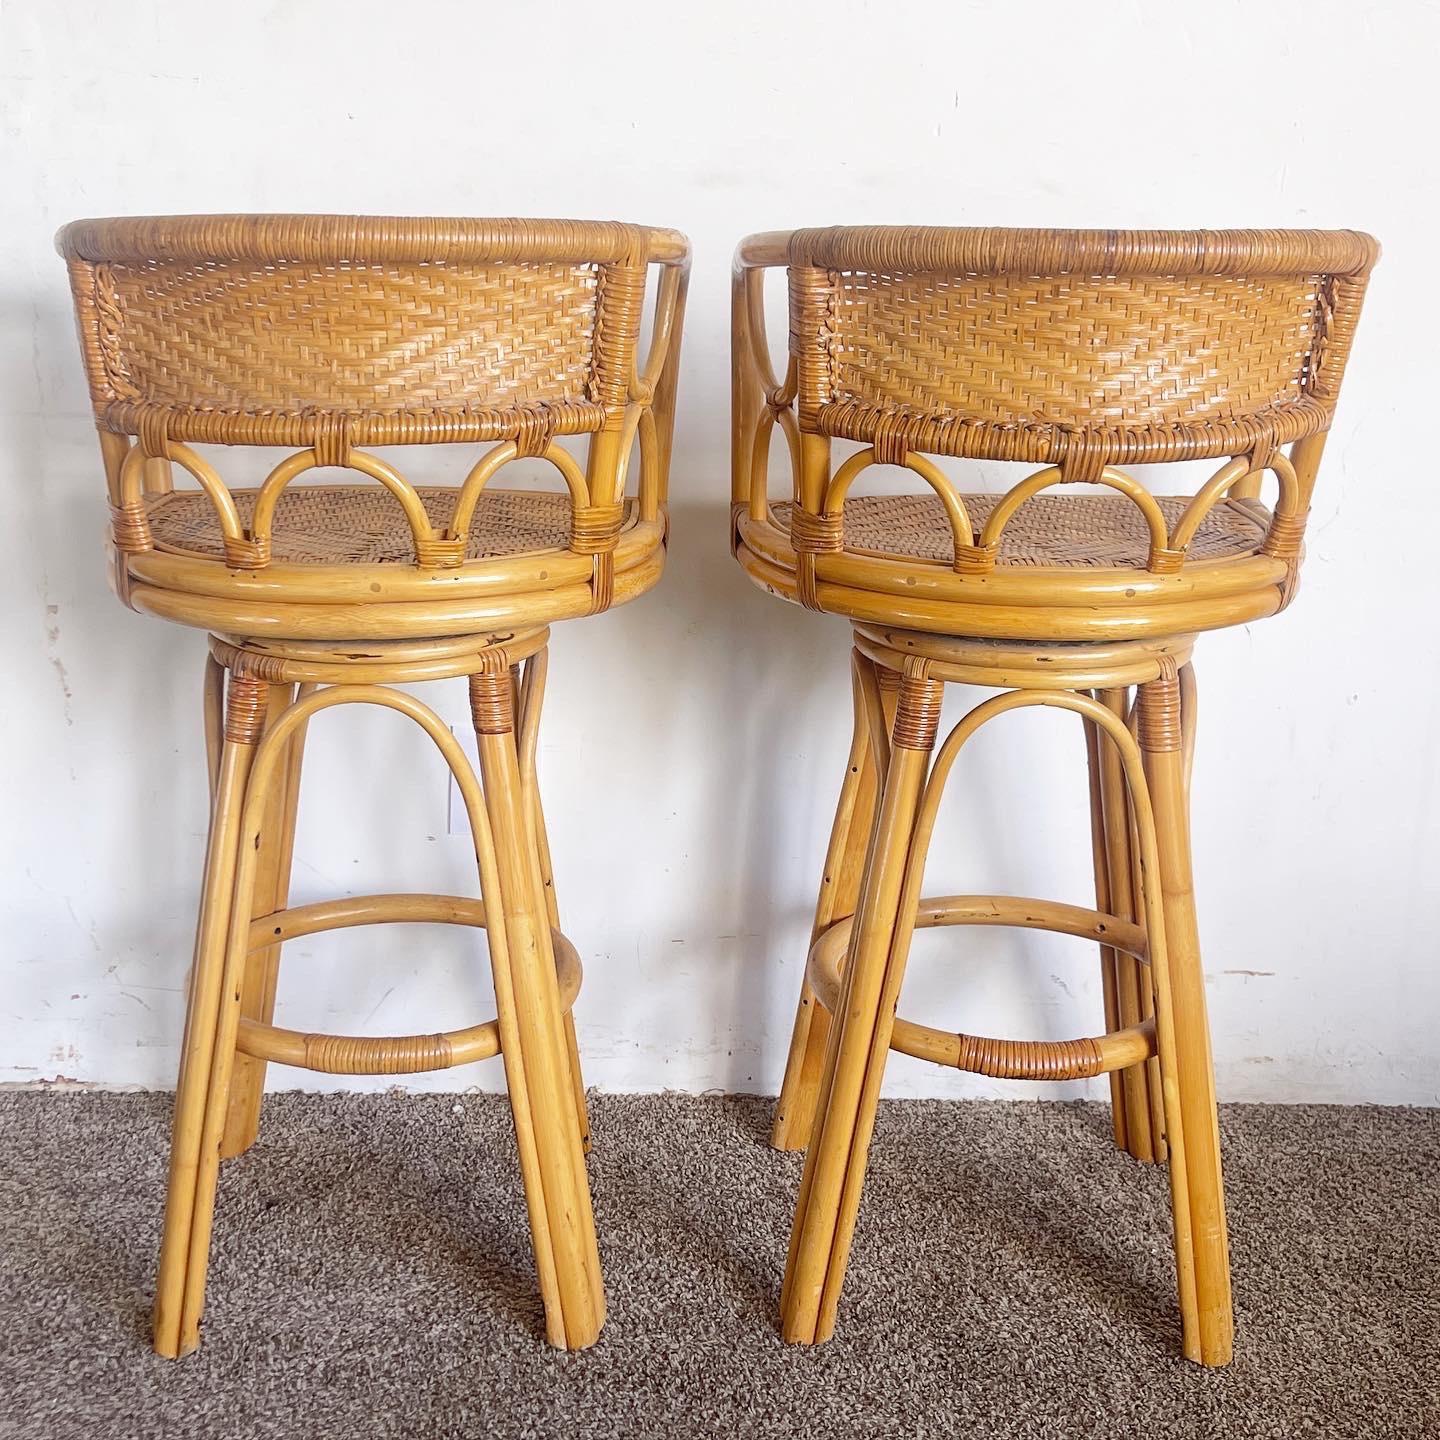 Bohemian Boho Chick Bamboo Rattan and Wicker Swivel Stools - a Pair For Sale